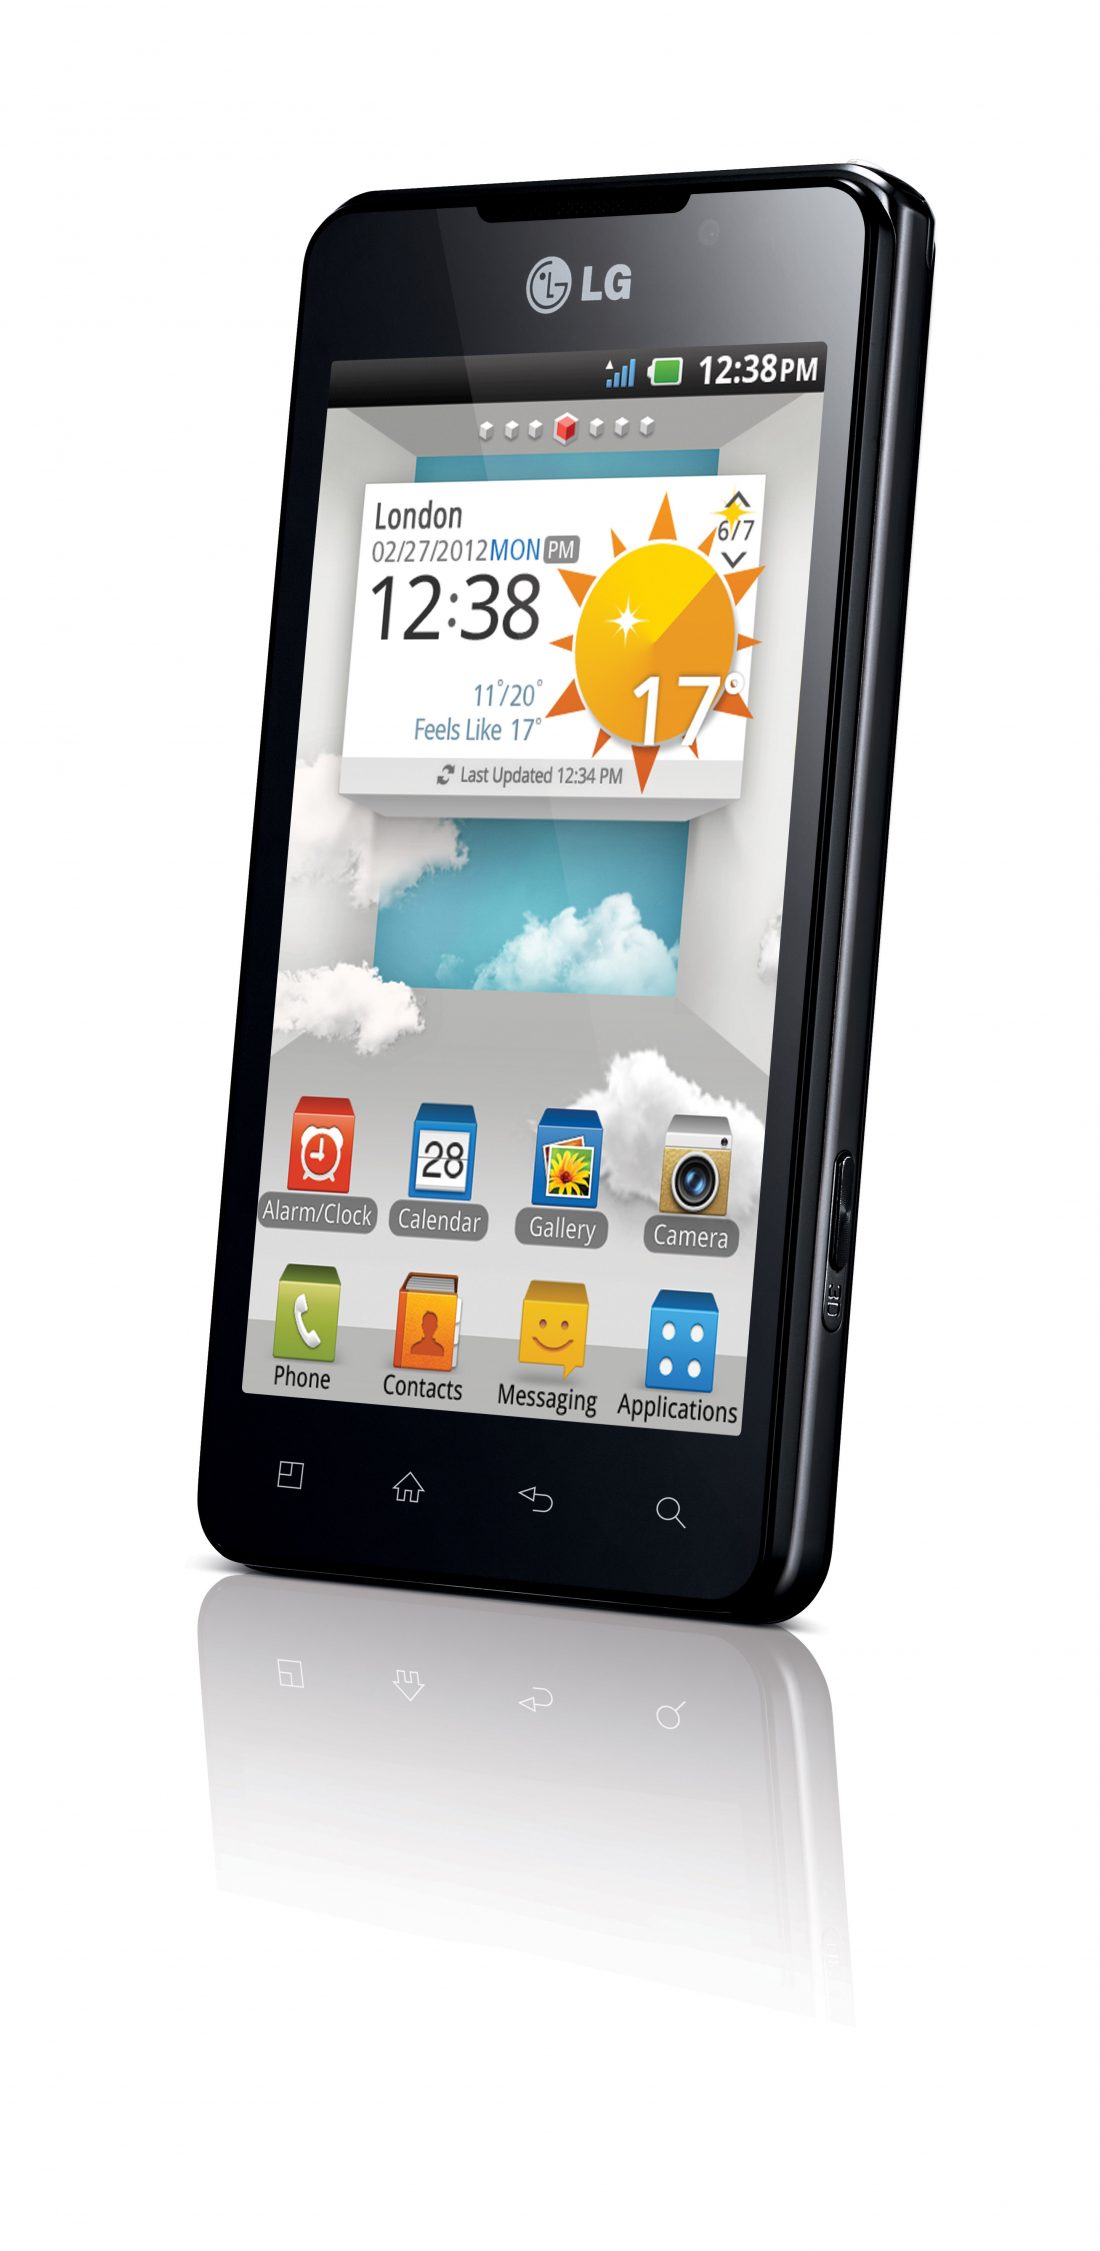 A top view of LG's Optimus 3D Max as if the phone is put on a place vertically while displaying its home screen.